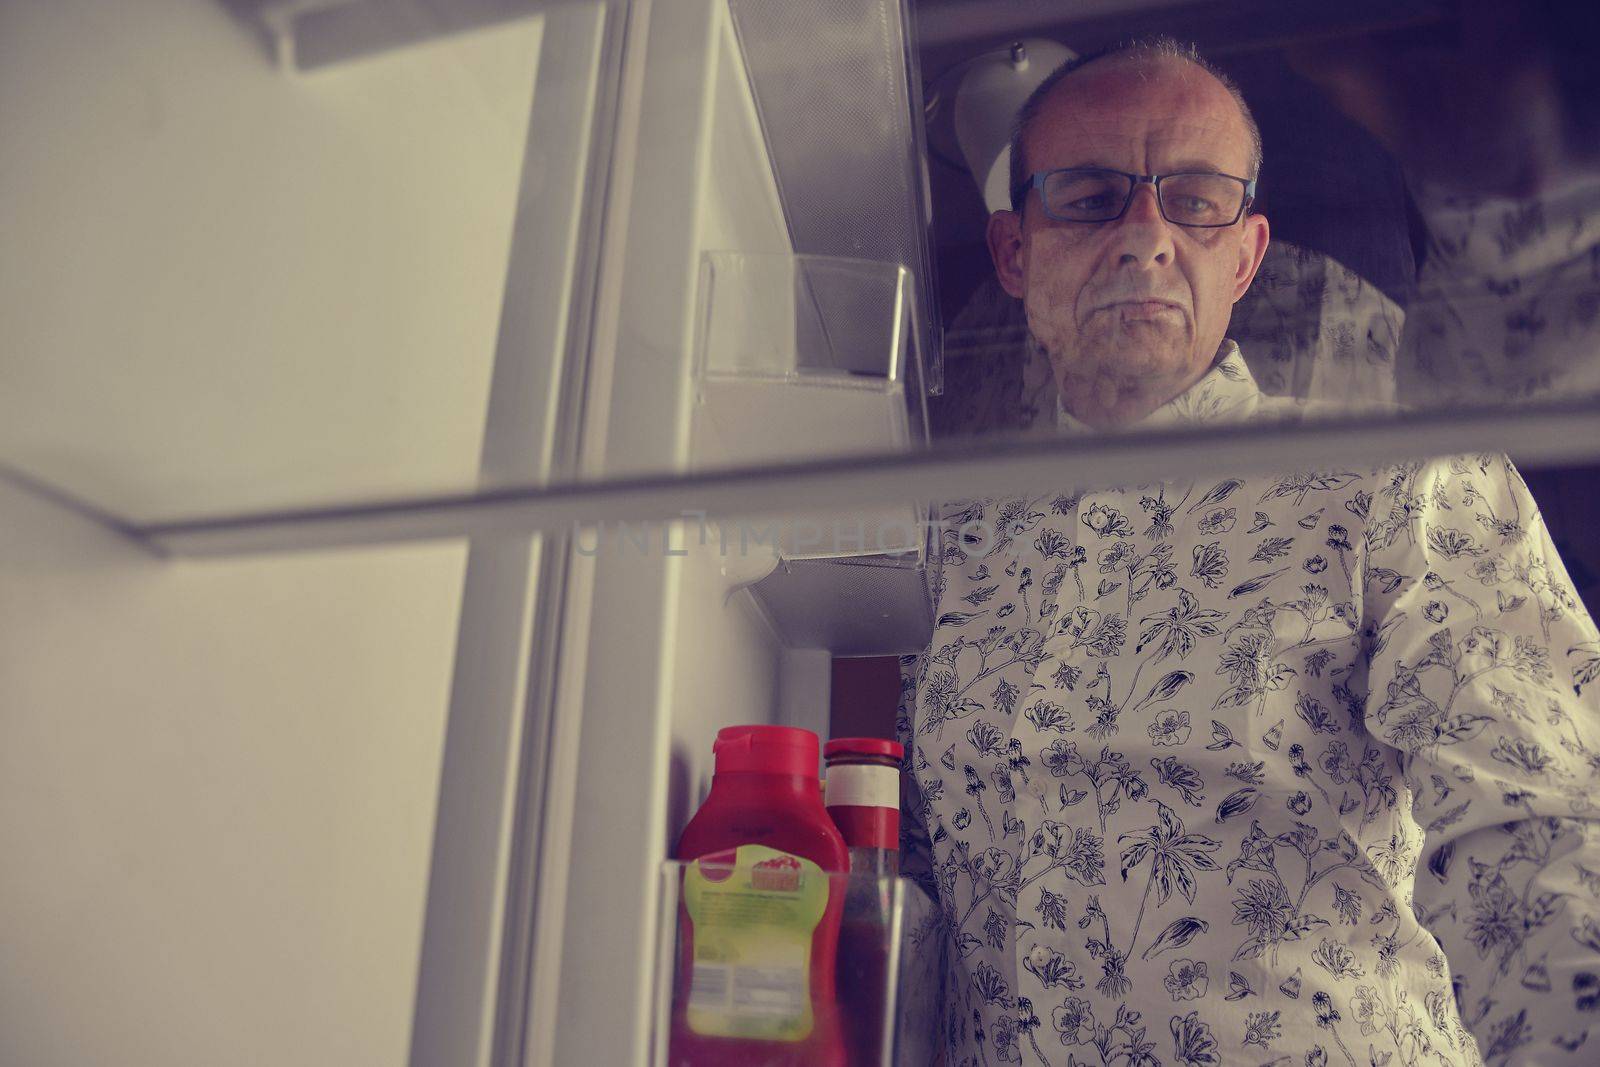 Hungry man looking for a late night meal in an empty fridge. Tired old man looking for a snack in the fridge at night, view from the fridge.